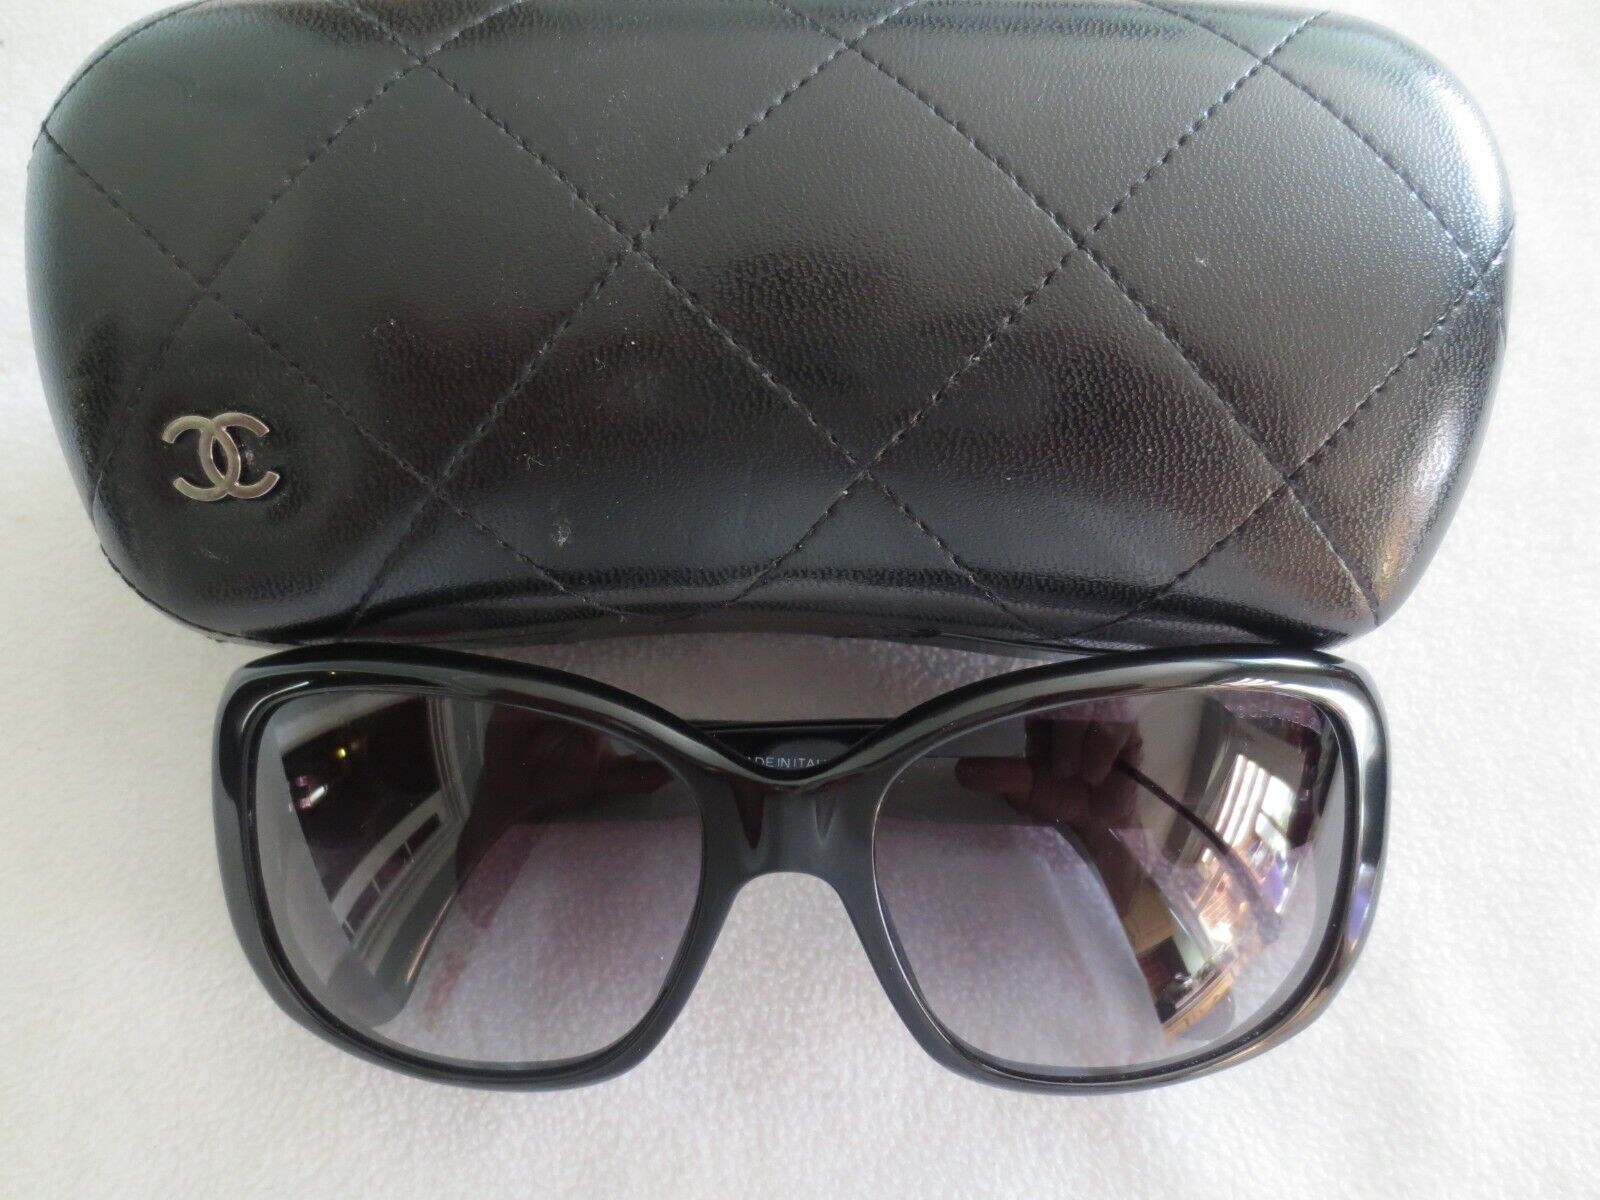 Chanel black frame sunglasses. 5191 501/3C Bouton. With case.